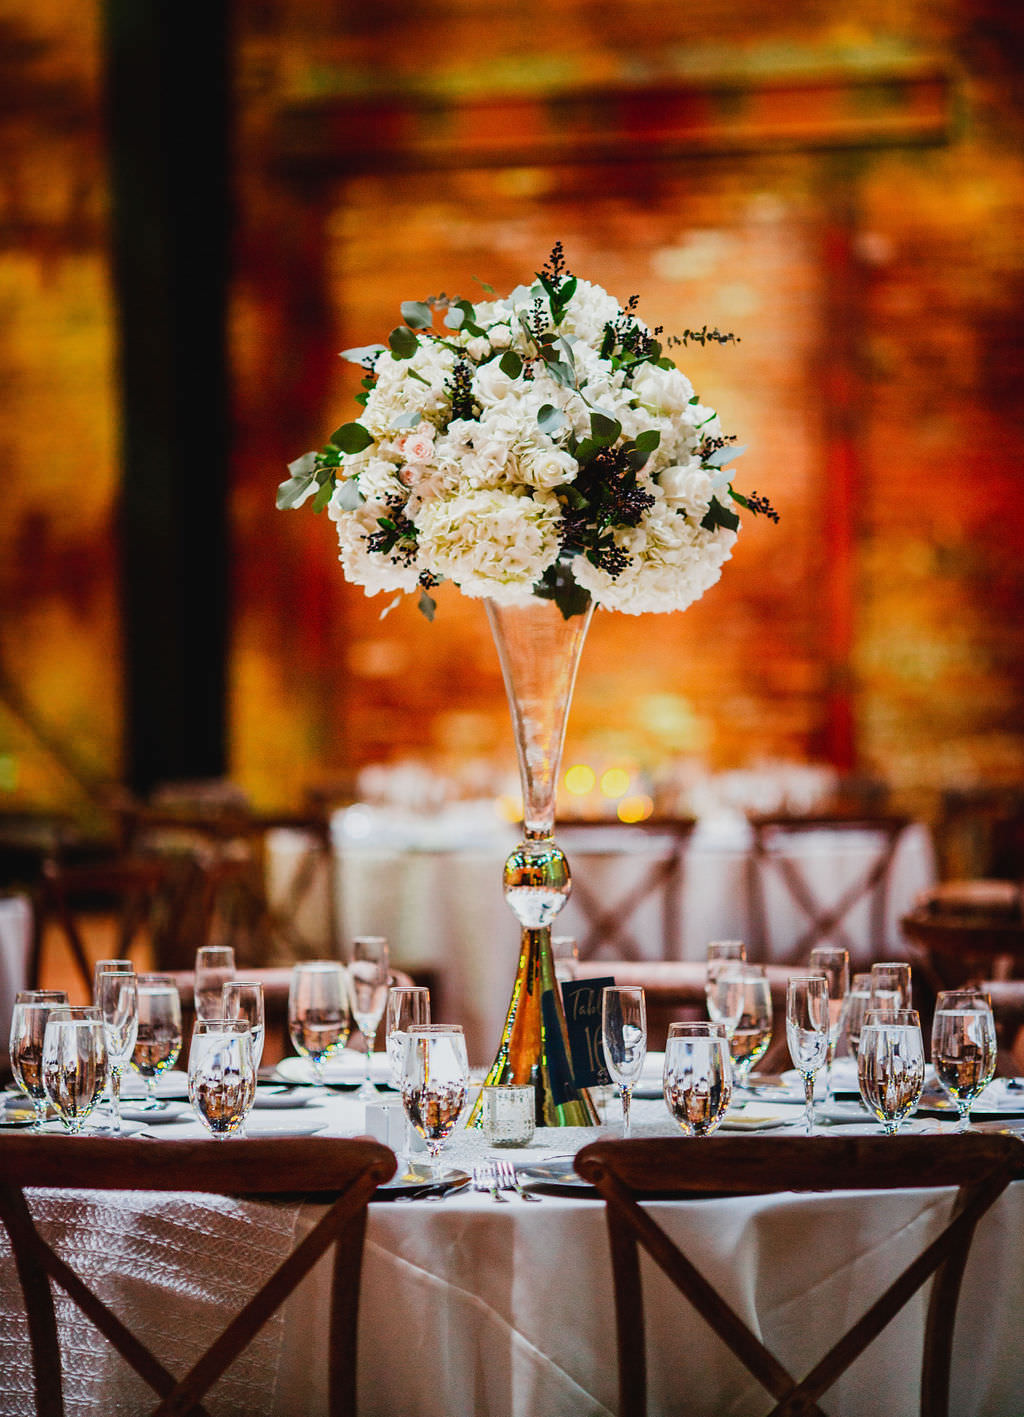 Classic, Tall Floral Centerpieces with White, Blush Pink, Navy and Ivory Flowers with Greenery, on Towering Crystal Vase | Tampa Bay Luxury Wedding Planner Coastal Coordinating